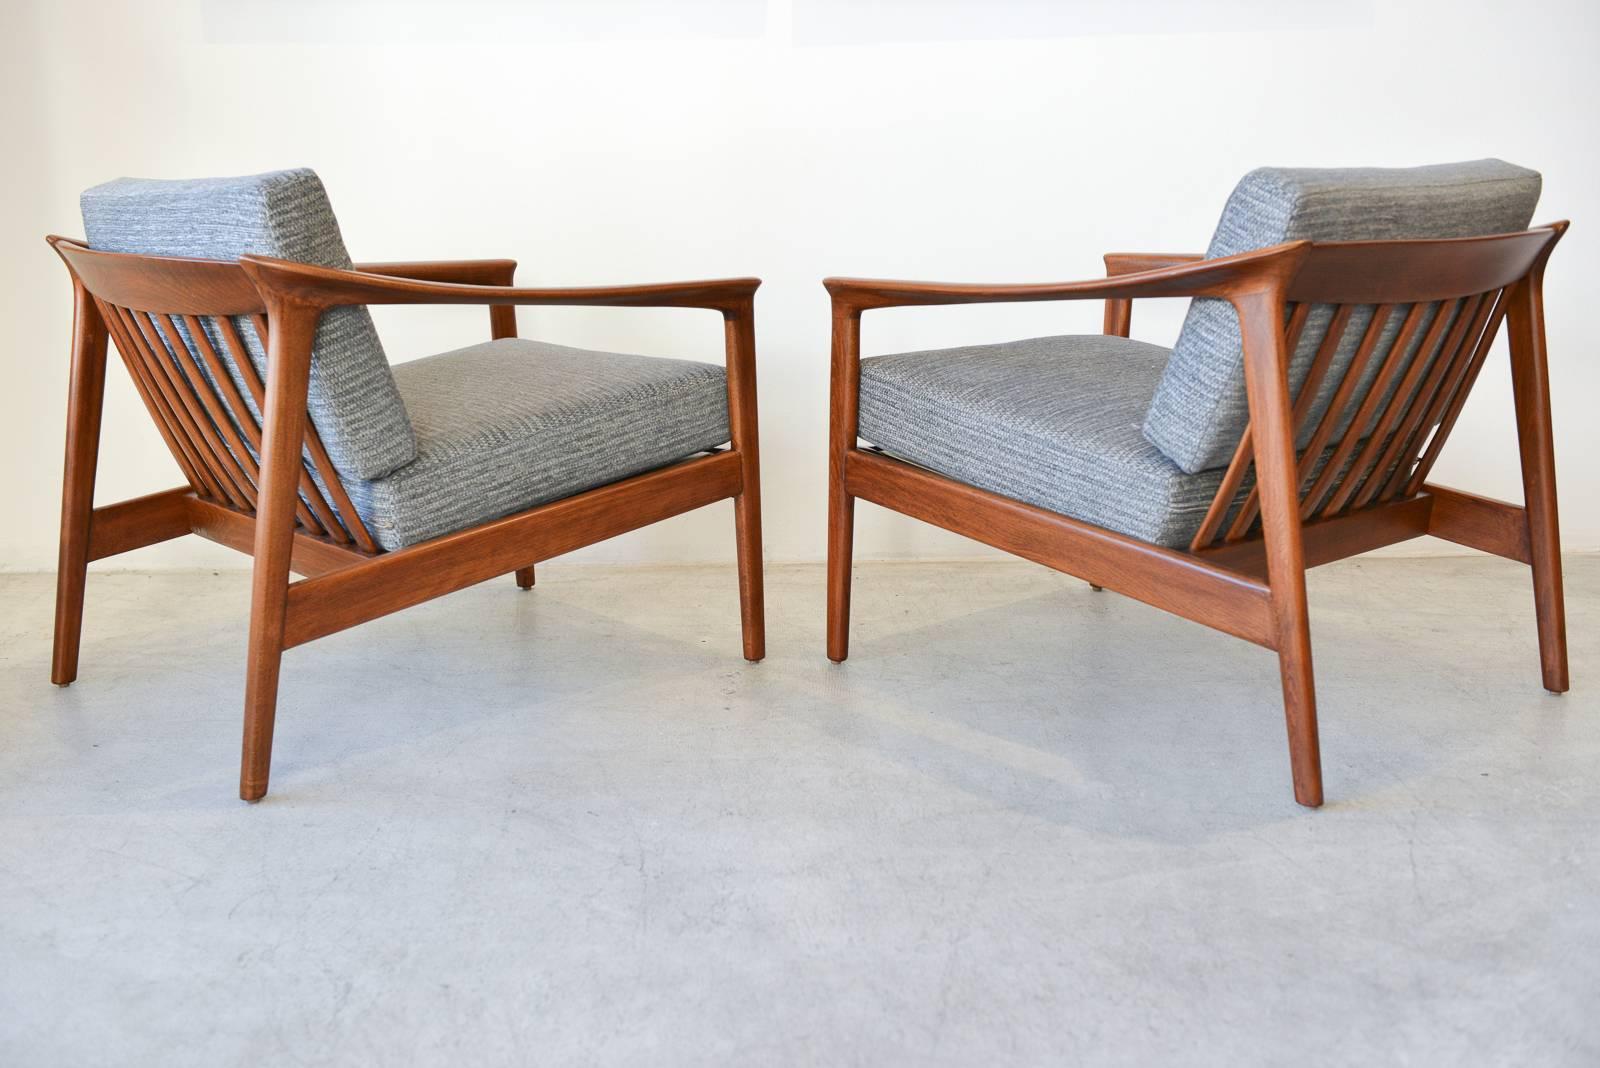 Pair of sculpted lounge chairs by Folke Ohlsson for Bodafors Sweden, circa 1960. Professionally restored birch frames in showroom condition with beautiful grey tweed upholstery and new foam. Seat strapping has also been restored. 

Rare, difficult